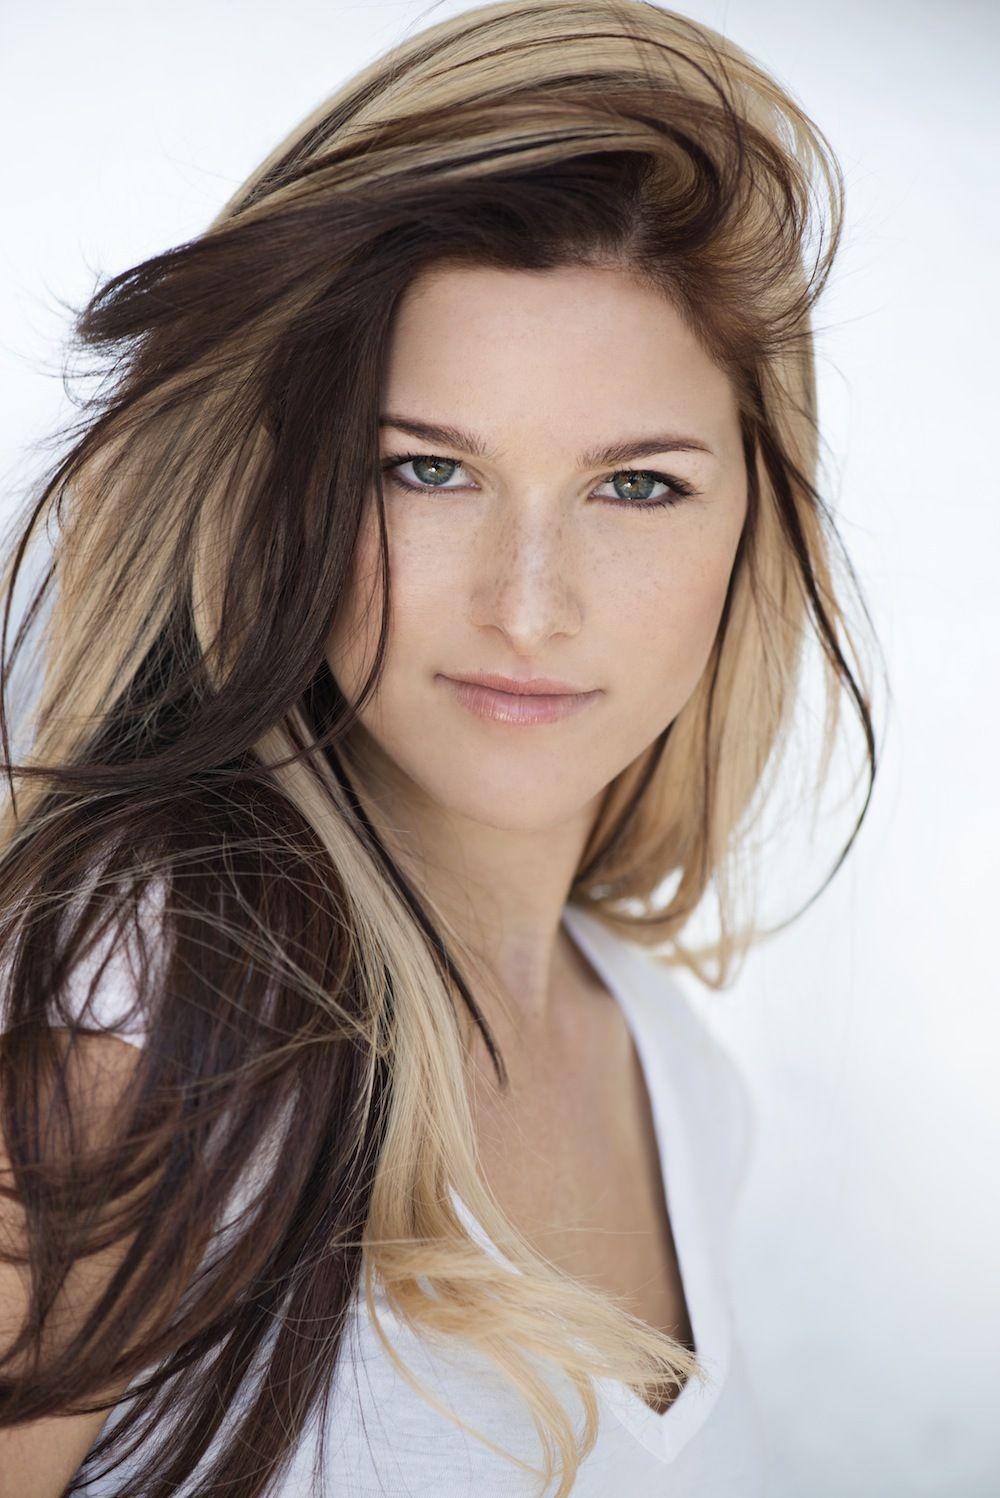 Cassadee Pope. People Don't Have to Be Anything Else